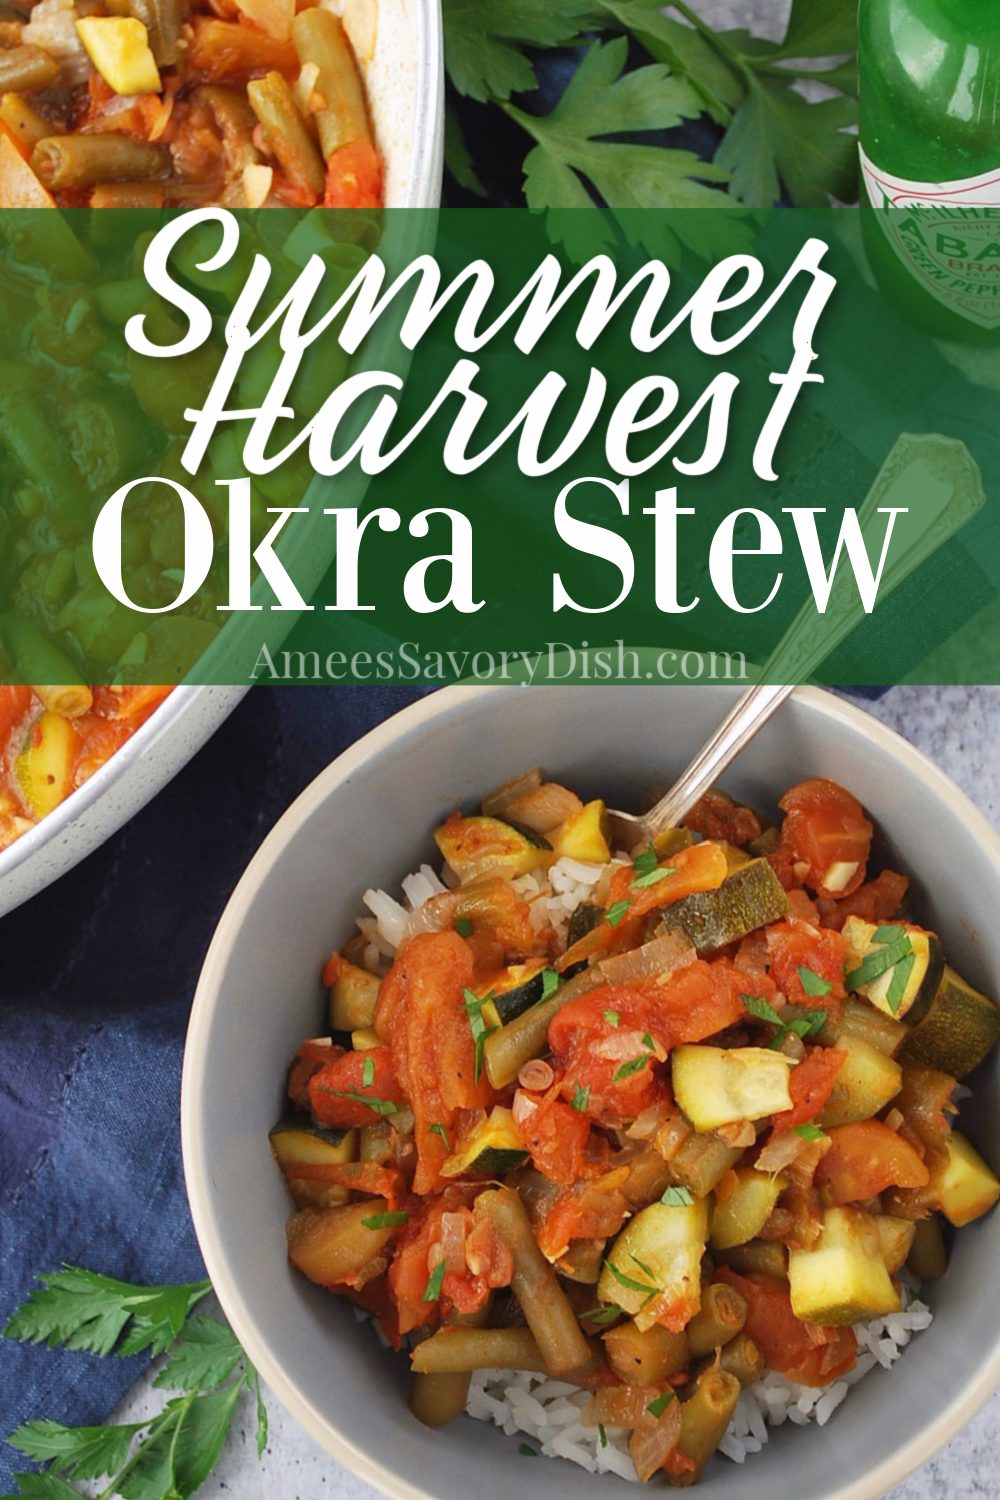 An easy summer okra stew recipe made with fresh okra, tomatoes, green beans, zucchini, olive oil, garlic, and onions.  It's the best of summer's harvest in a bowl! #okra #okrastew #okrarecipe #summerstew #vegetablestew via @Ameessavorydish